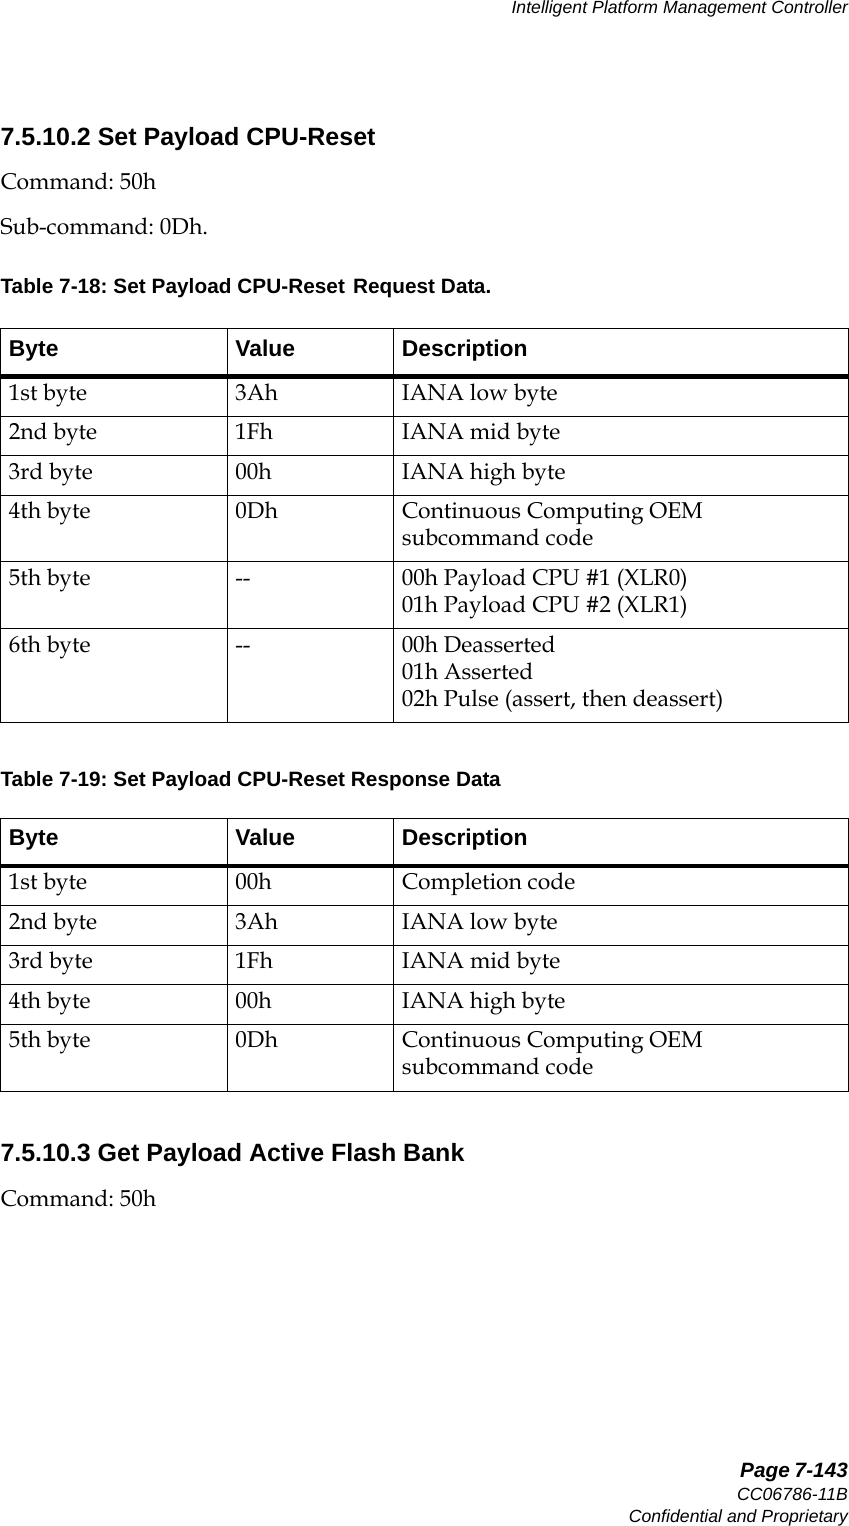   Page 7-143CC06786-11BConfidential and ProprietaryIntelligent Platform Management Controller14ABABPreliminary7.5.10.2 Set Payload CPU-Reset Command: 50hSub-command: 0Dh.7.5.10.3 Get Payload Active Flash Bank Command: 50hTable 7-18: Set Payload CPU-Reset Request Data.Byte Value Description1st byte 3Ah IANA low byte2nd byte 1Fh IANA mid byte3rd byte 00h IANA high byte4th byte 0Dh Continuous Computing OEM subcommand code5th byte -- 00h Payload CPU #1 (XLR0)01h Payload CPU #2 (XLR1)6th byte -- 00h Deasserted01h Asserted02h Pulse (assert, then deassert)Table 7-19: Set Payload CPU-Reset Response DataByte Value Description1st byte 00h Completion code2nd byte 3Ah IANA low byte3rd byte 1Fh IANA mid byte4th byte 00h IANA high byte5th byte 0Dh Continuous Computing OEM subcommand code